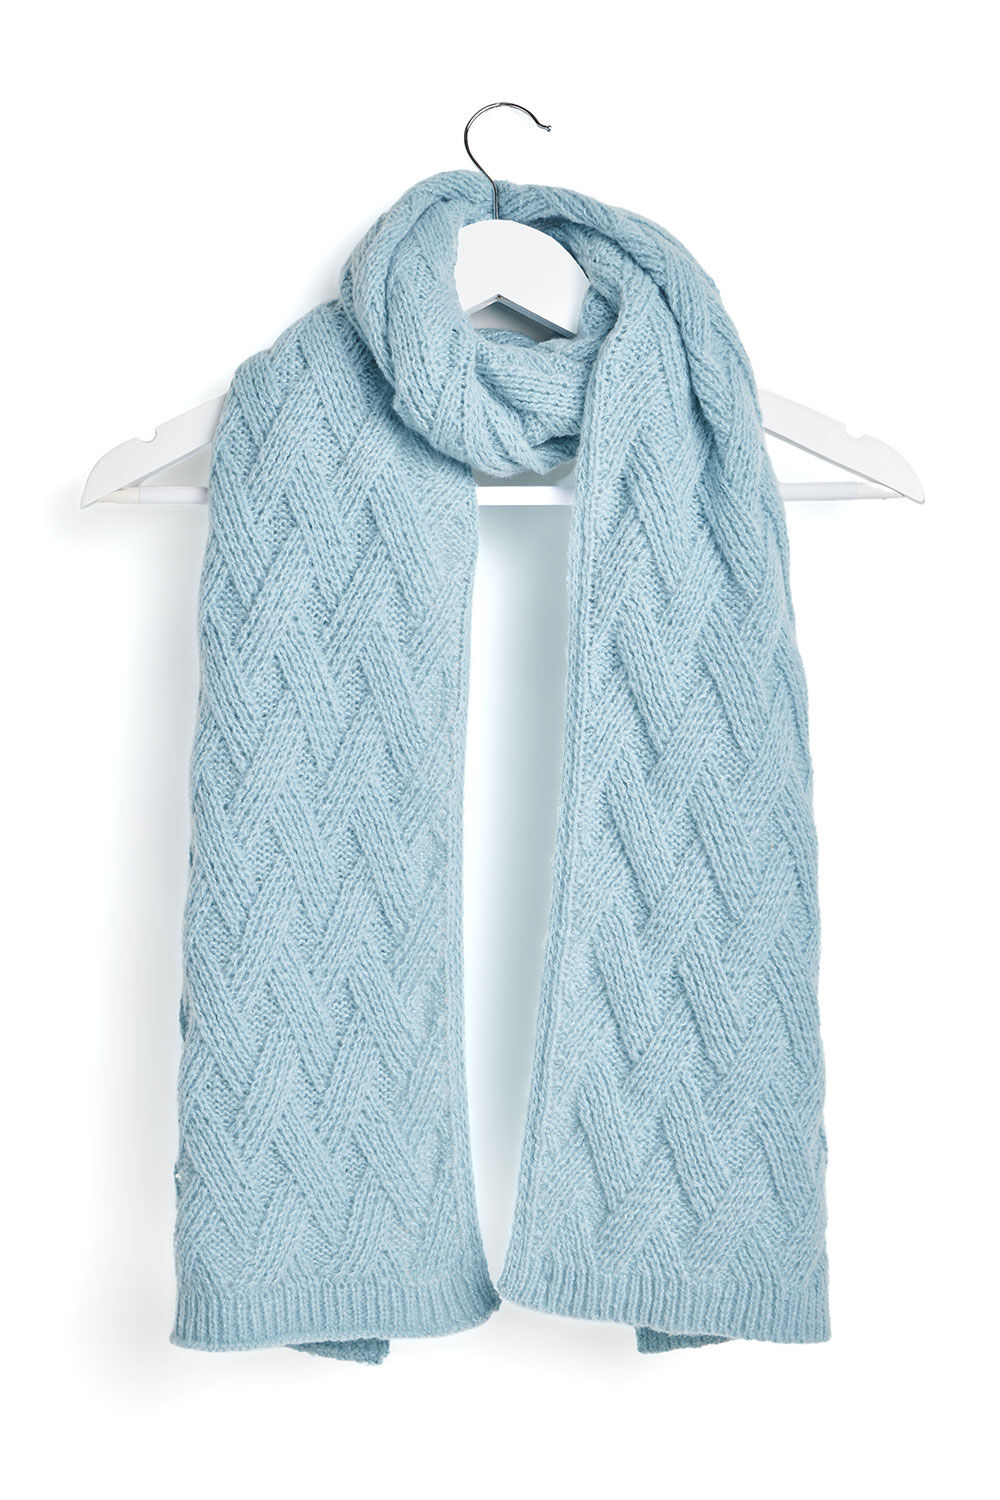 Bonmarche Blue Cross Over Cable Knit Scarf